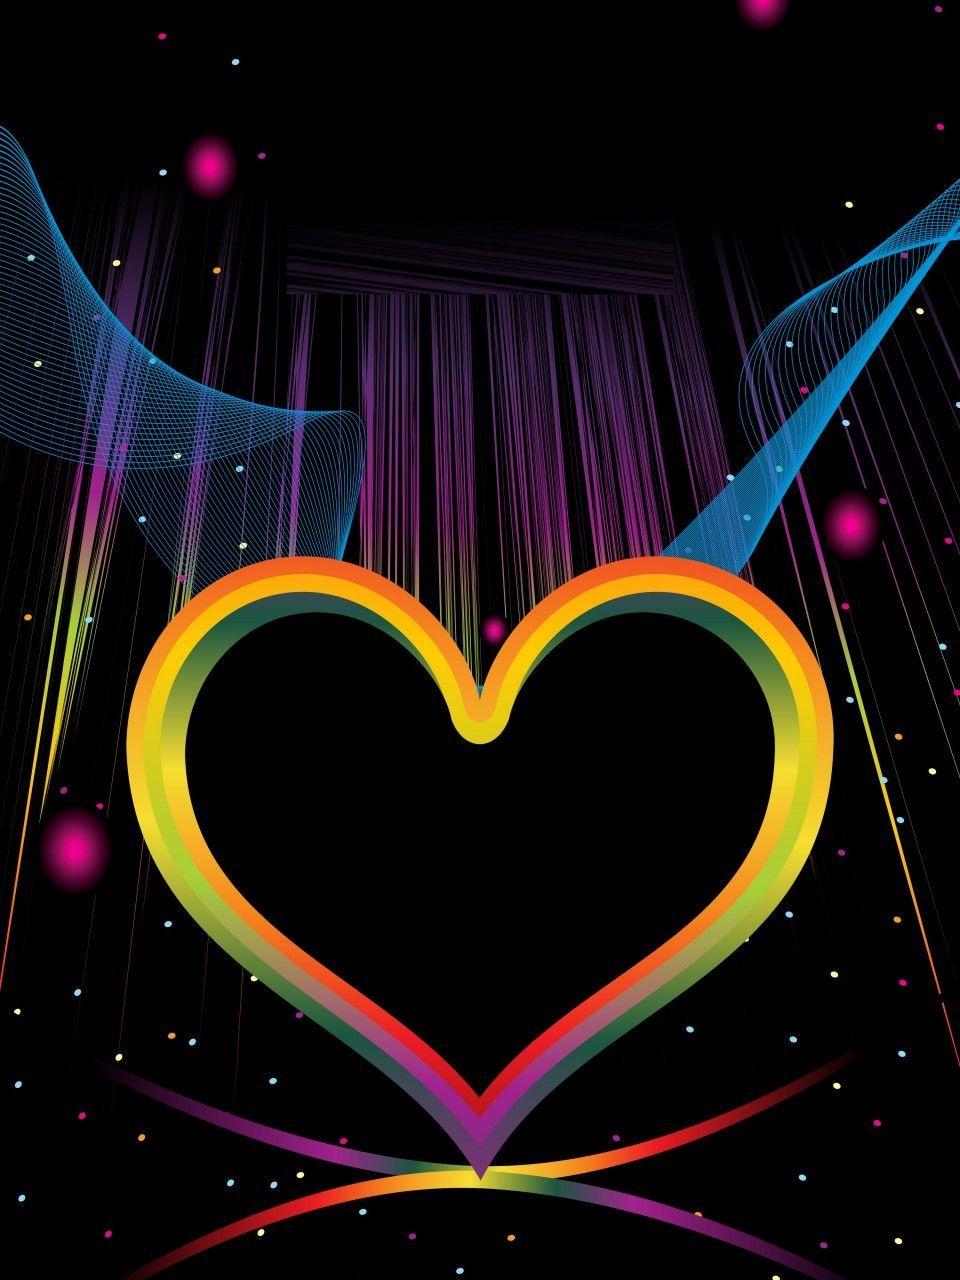 Colorful Heart Background. Colorful Heart on Black Background M